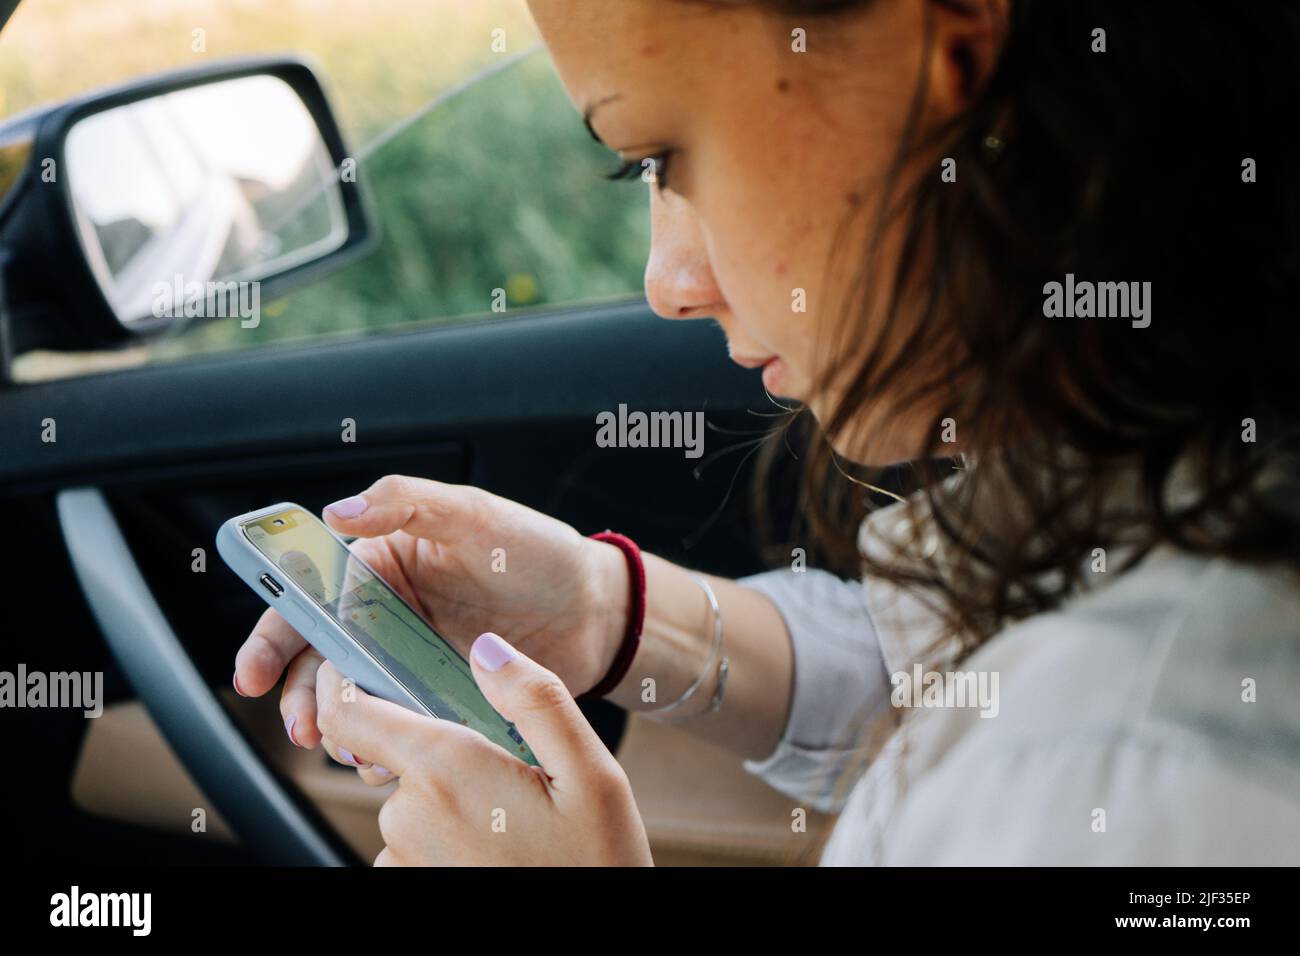 Young woman looking at her phone in the car Stock Photo